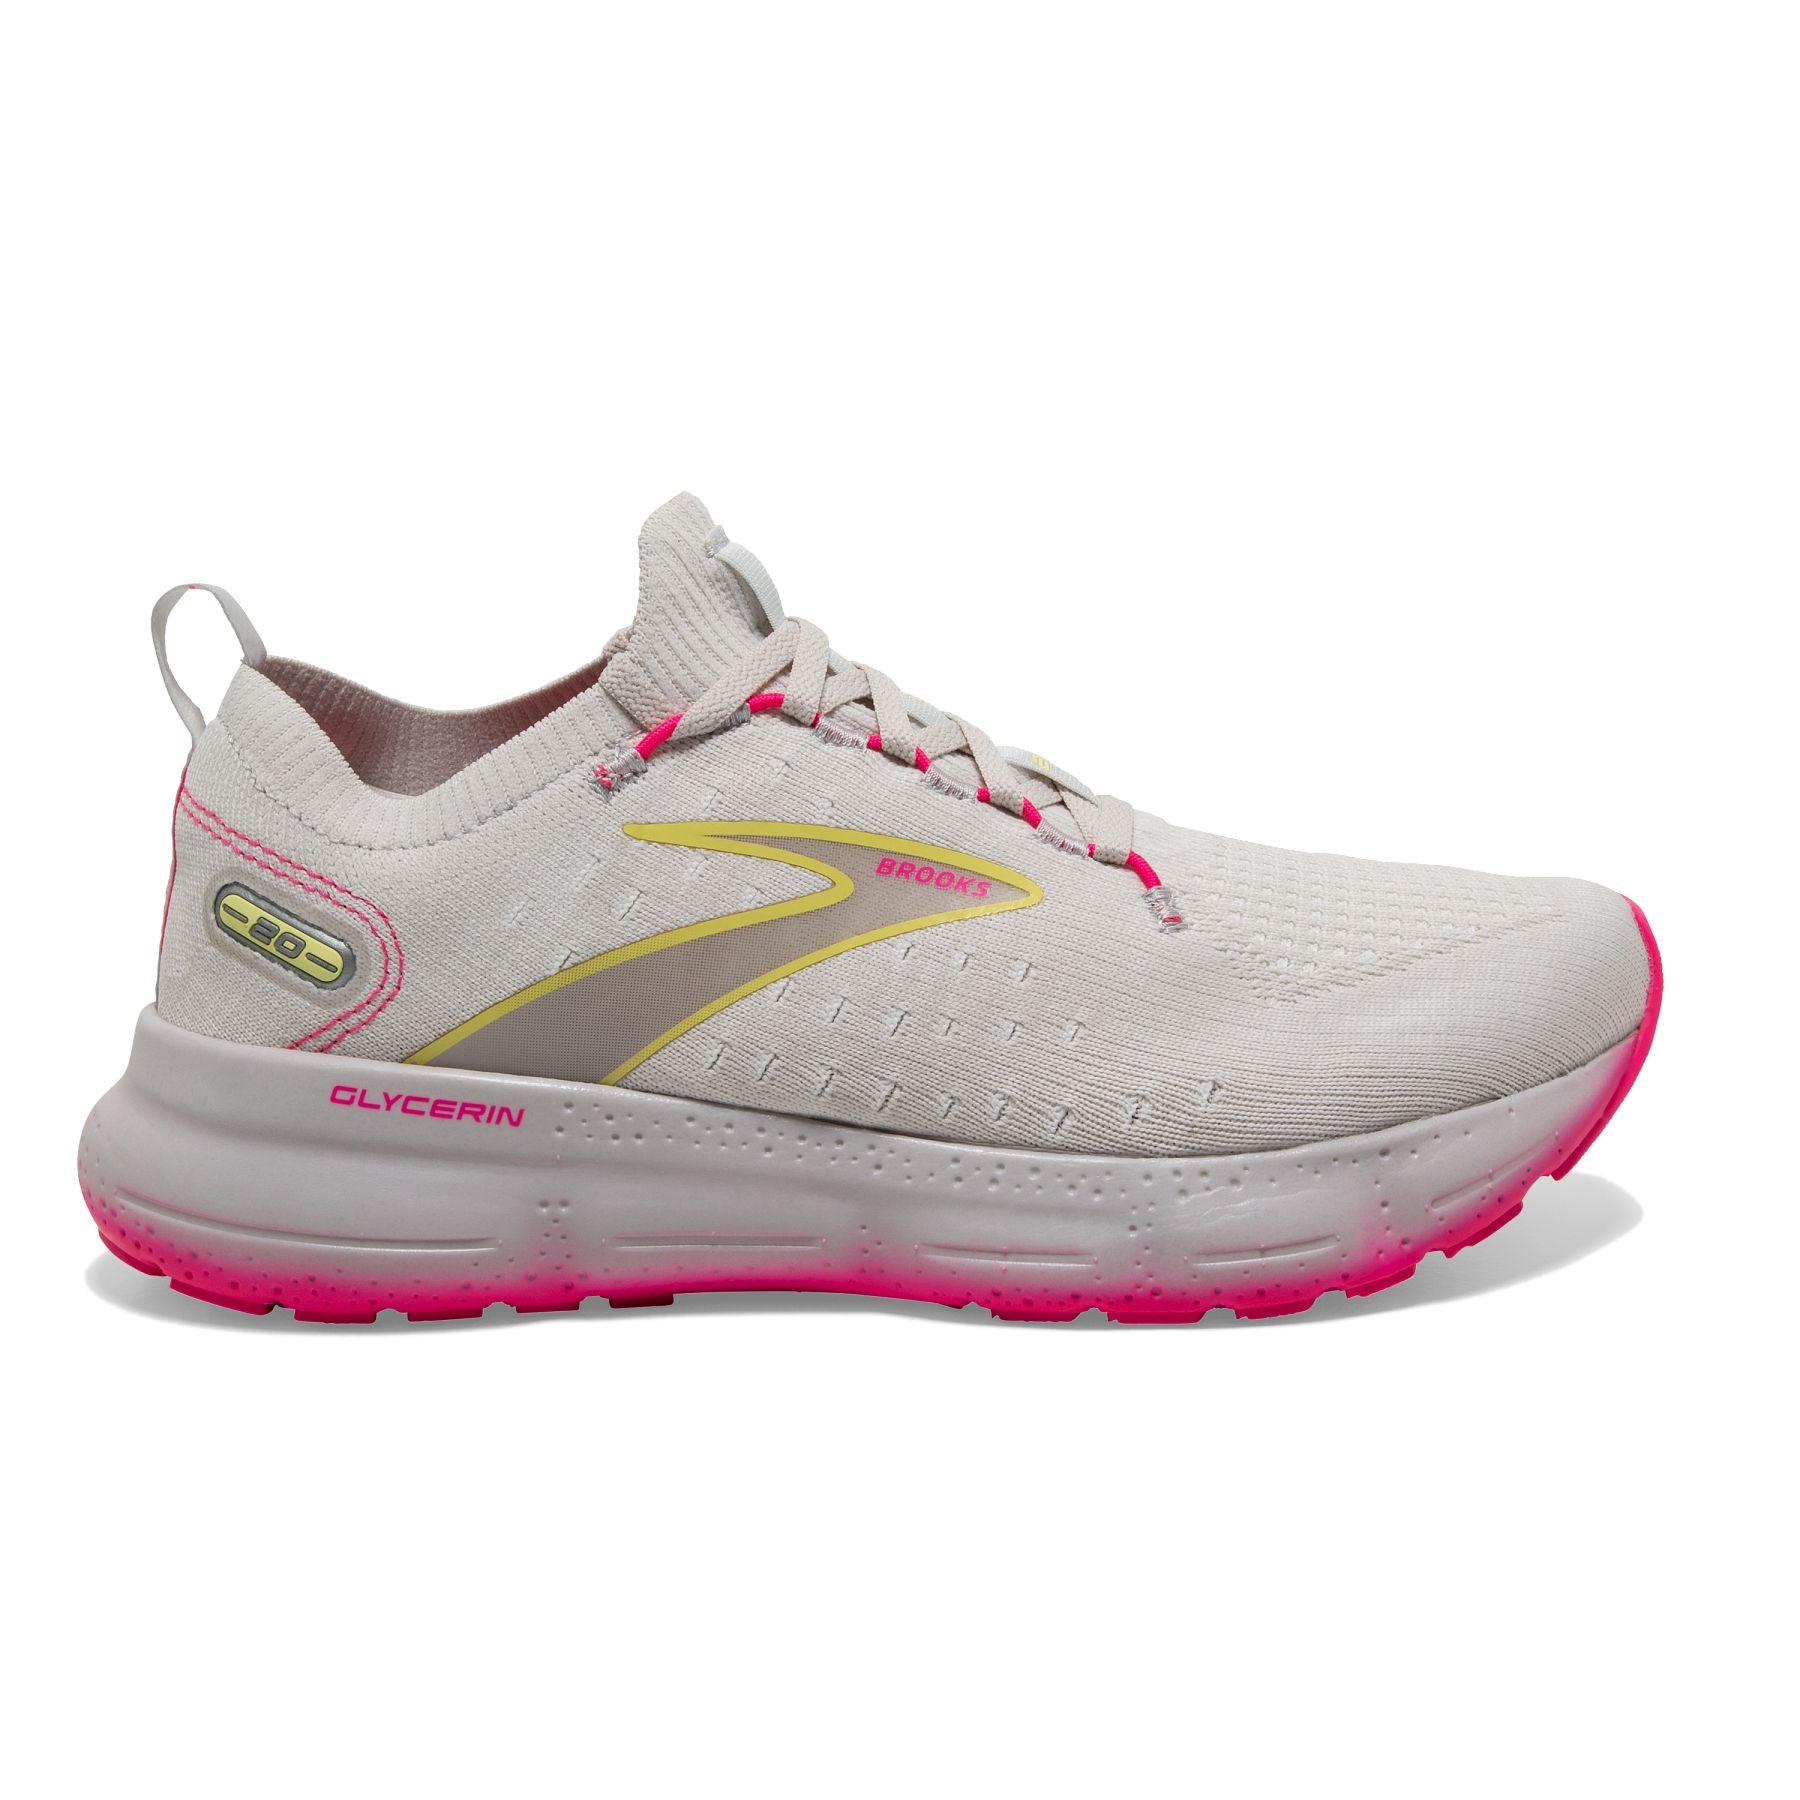 Lateral view of the Women's Glycerin Stealthfit 20 in the color Grey/Yellow/Pink